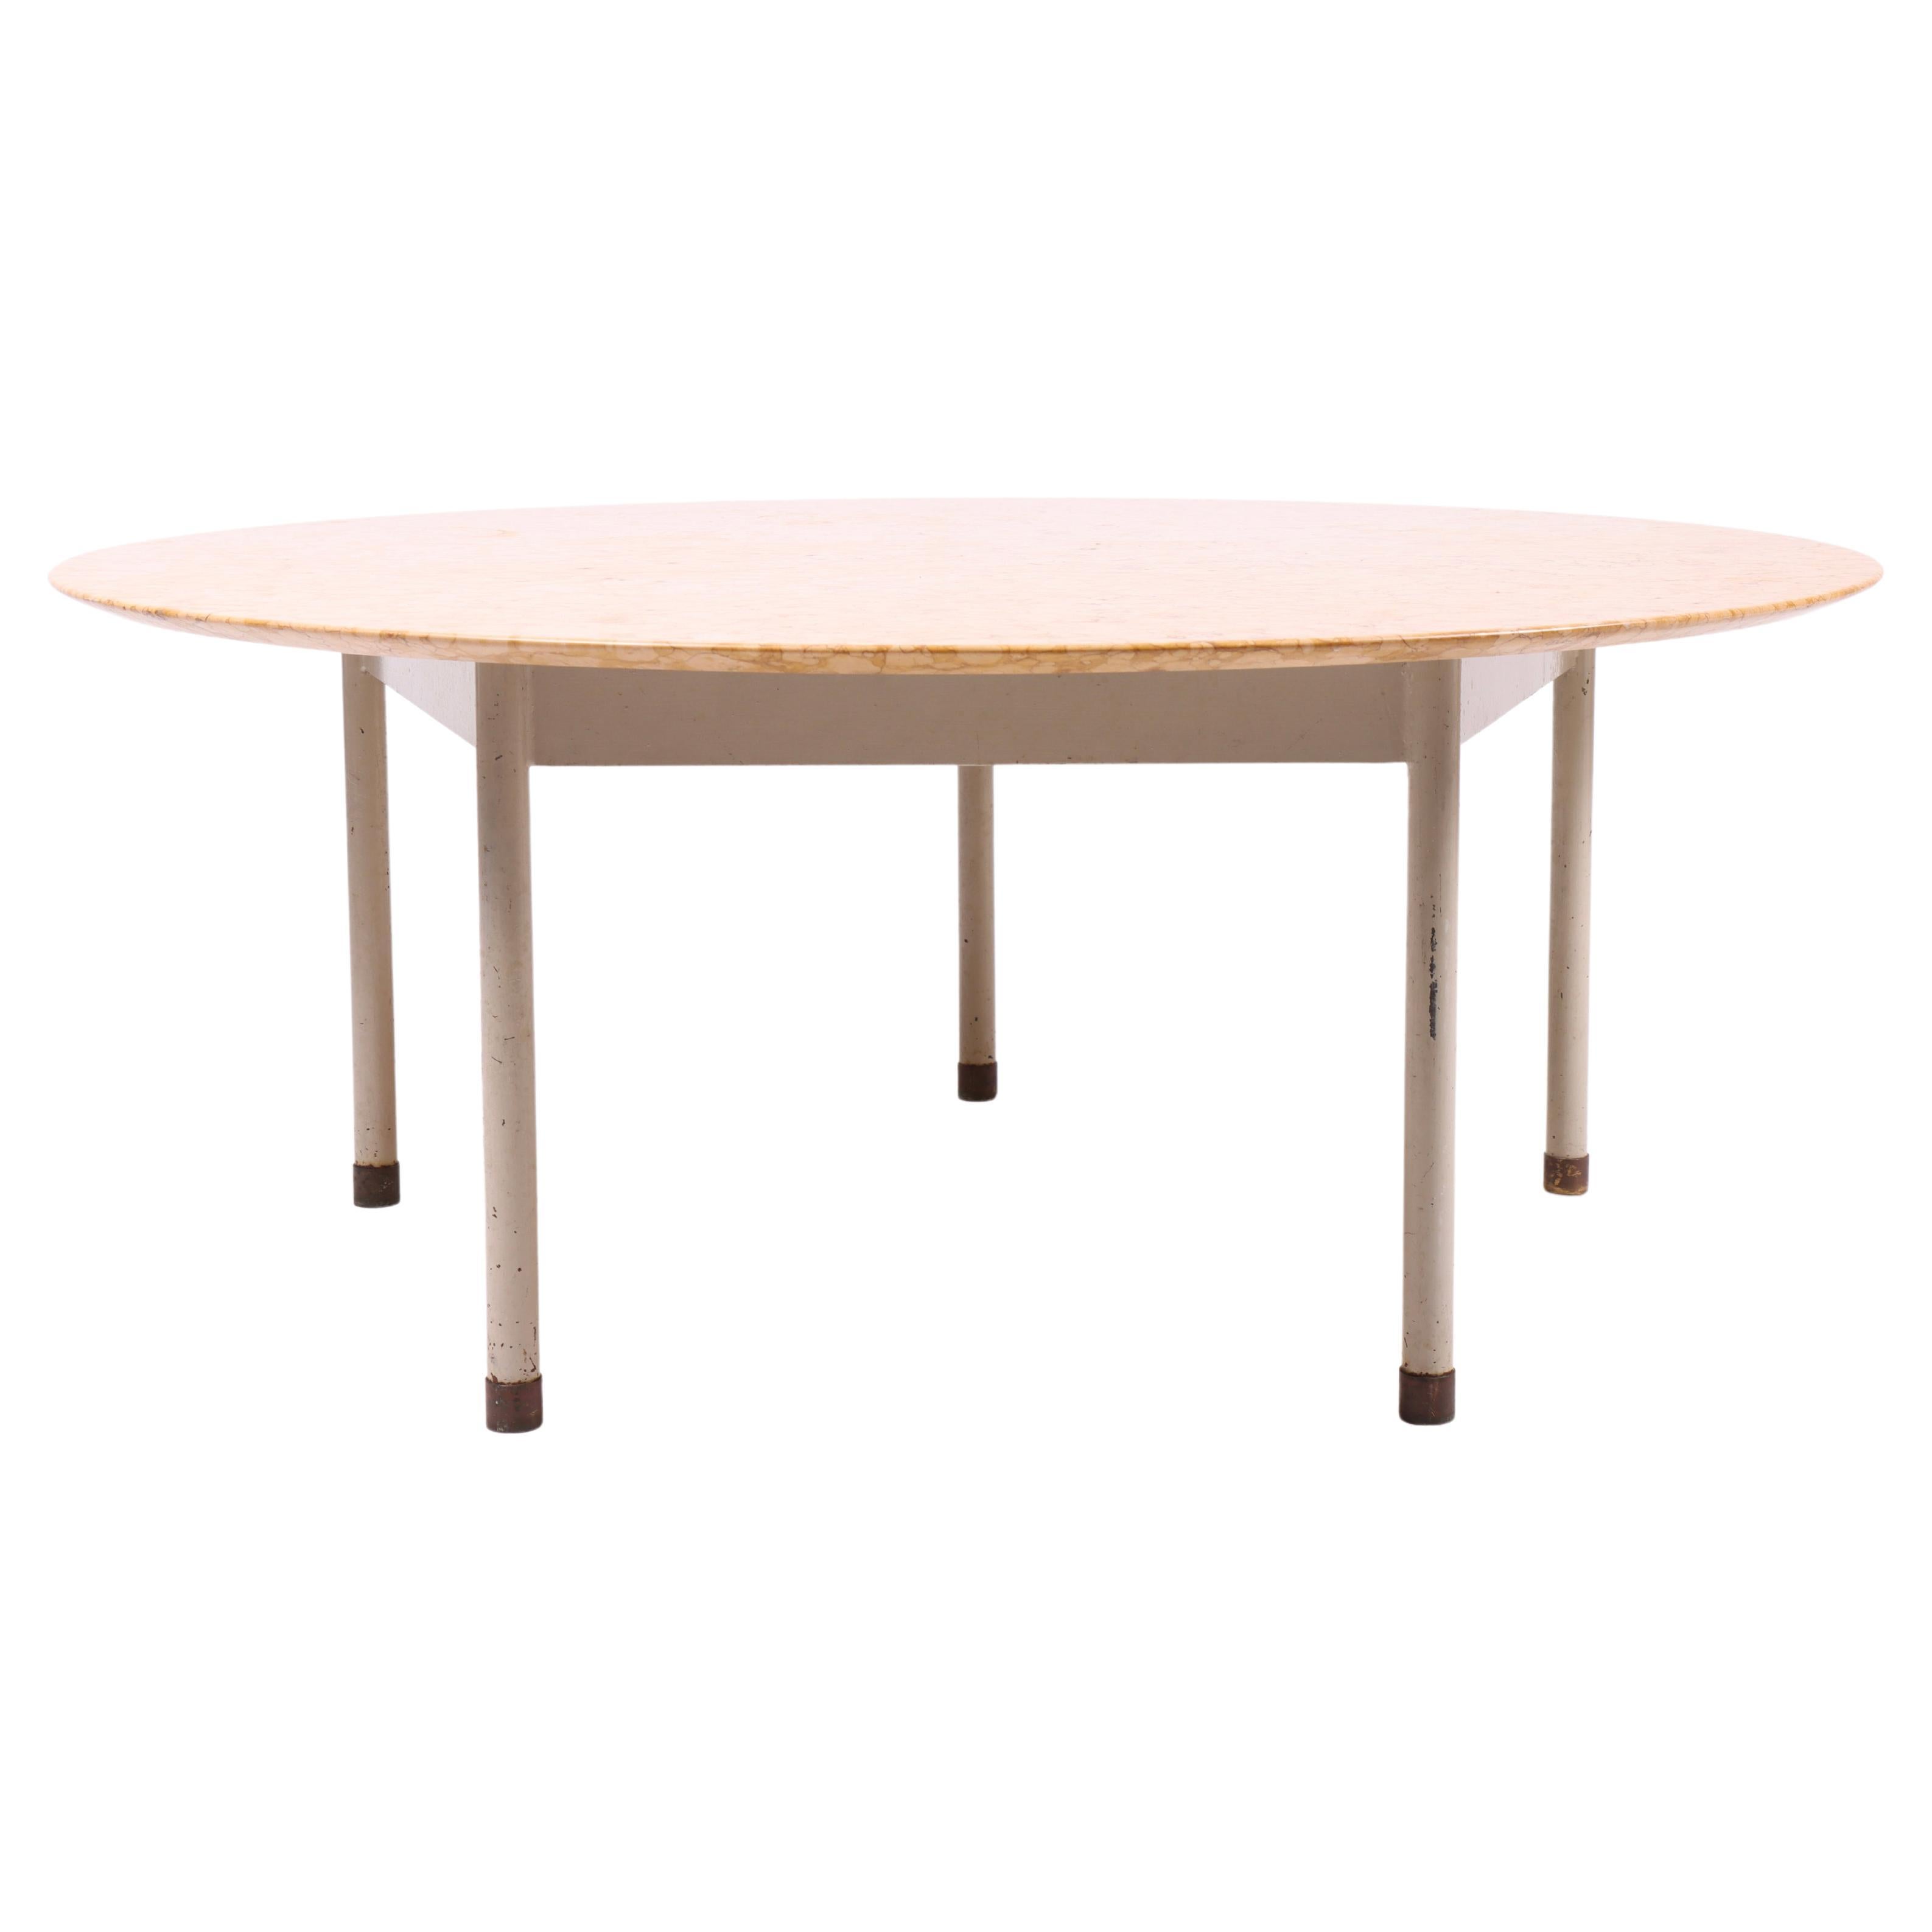 Midcentury Circular Low Table with Red Verona Marble Top by Acton Bjørn.